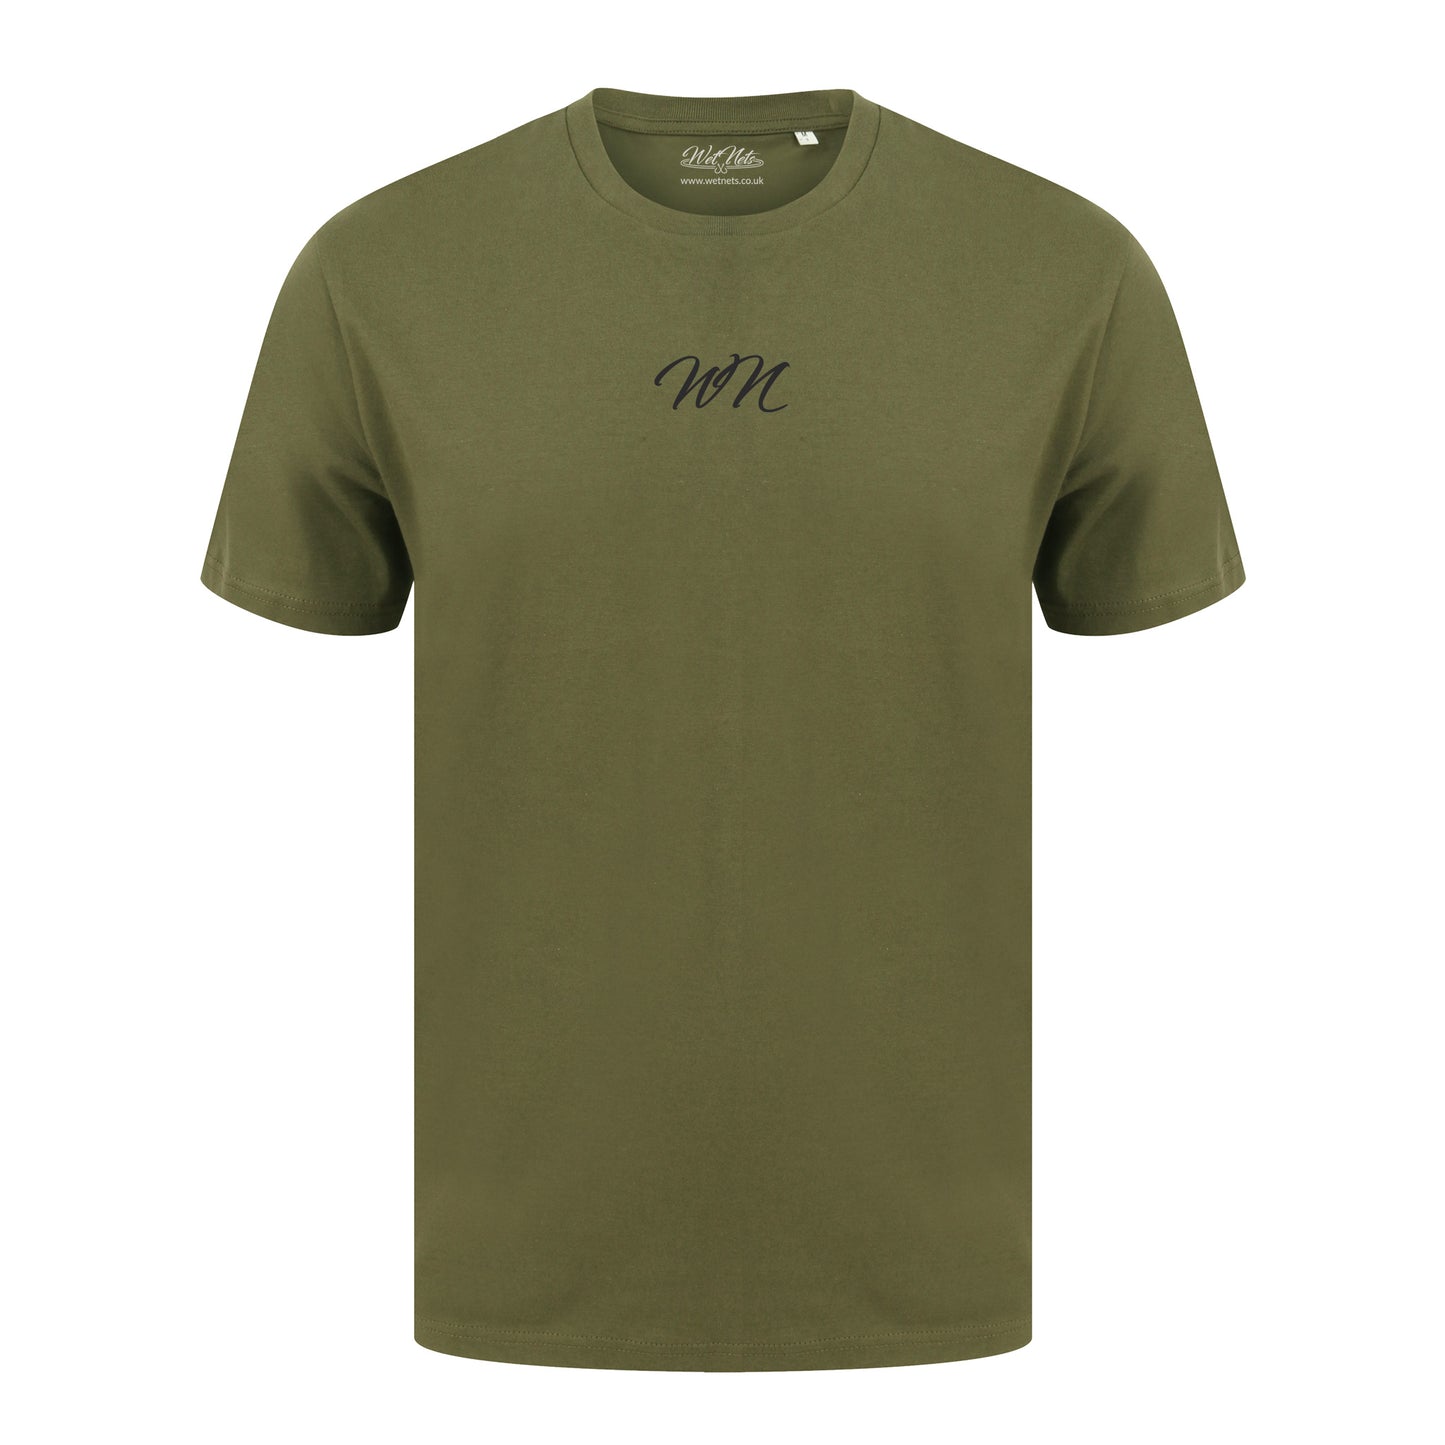 Olive T Shirt with Small Black WN Logo